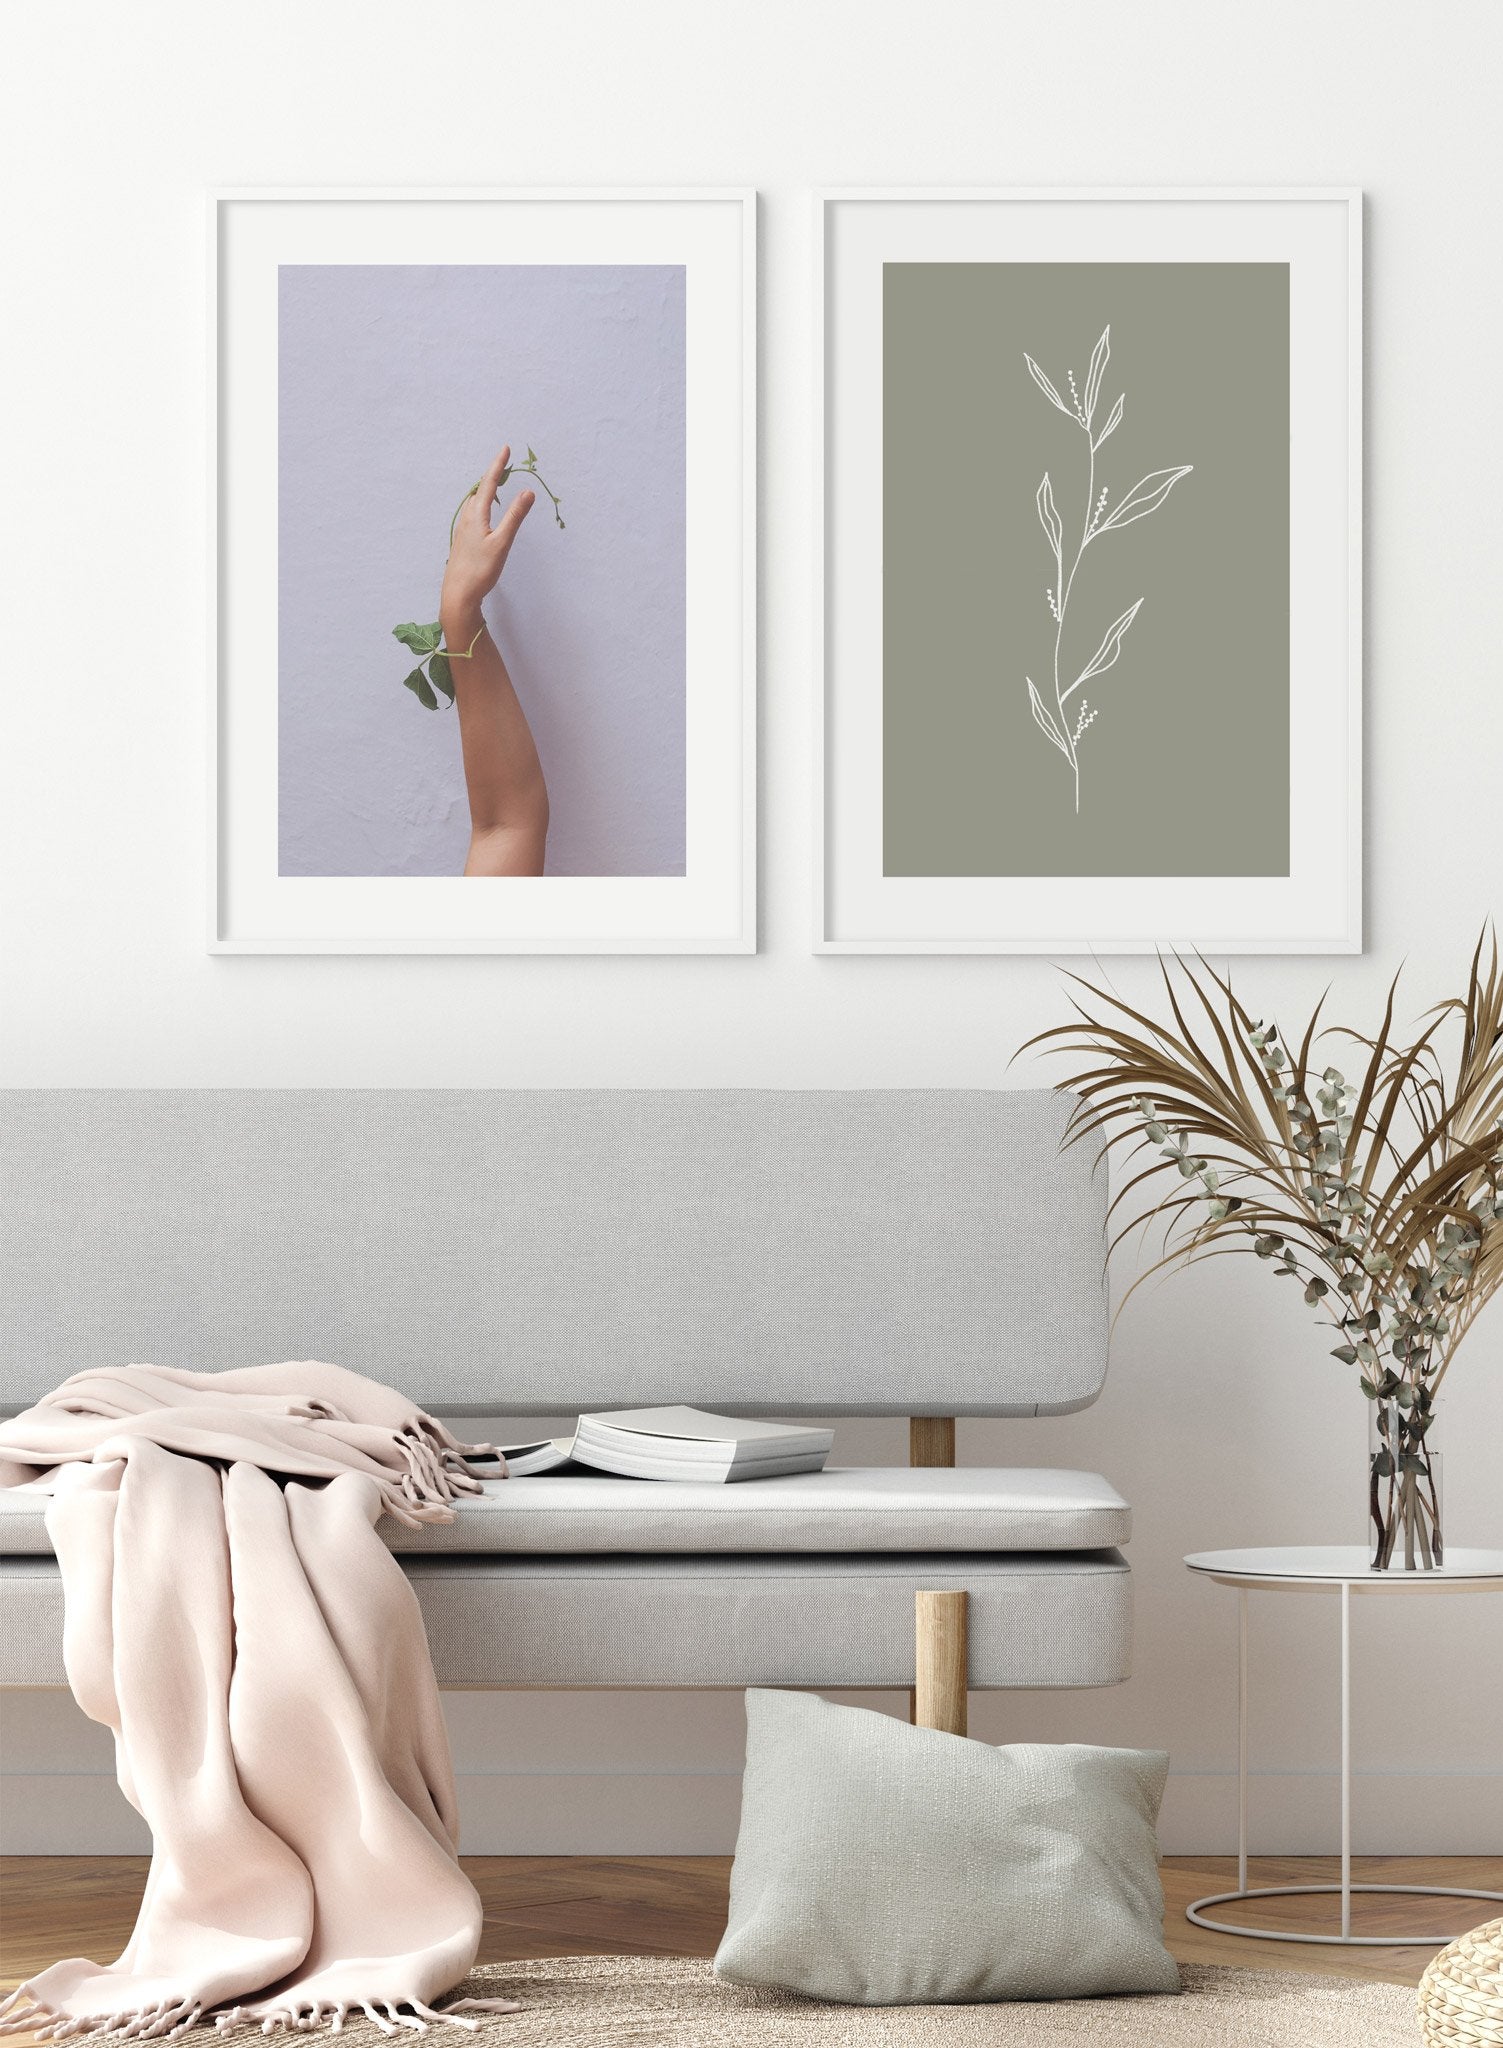 "Skin & Foliage" is a minimalist photography poster by Opposite Wall of a nude arm and hand entangled with a green leafy stem.